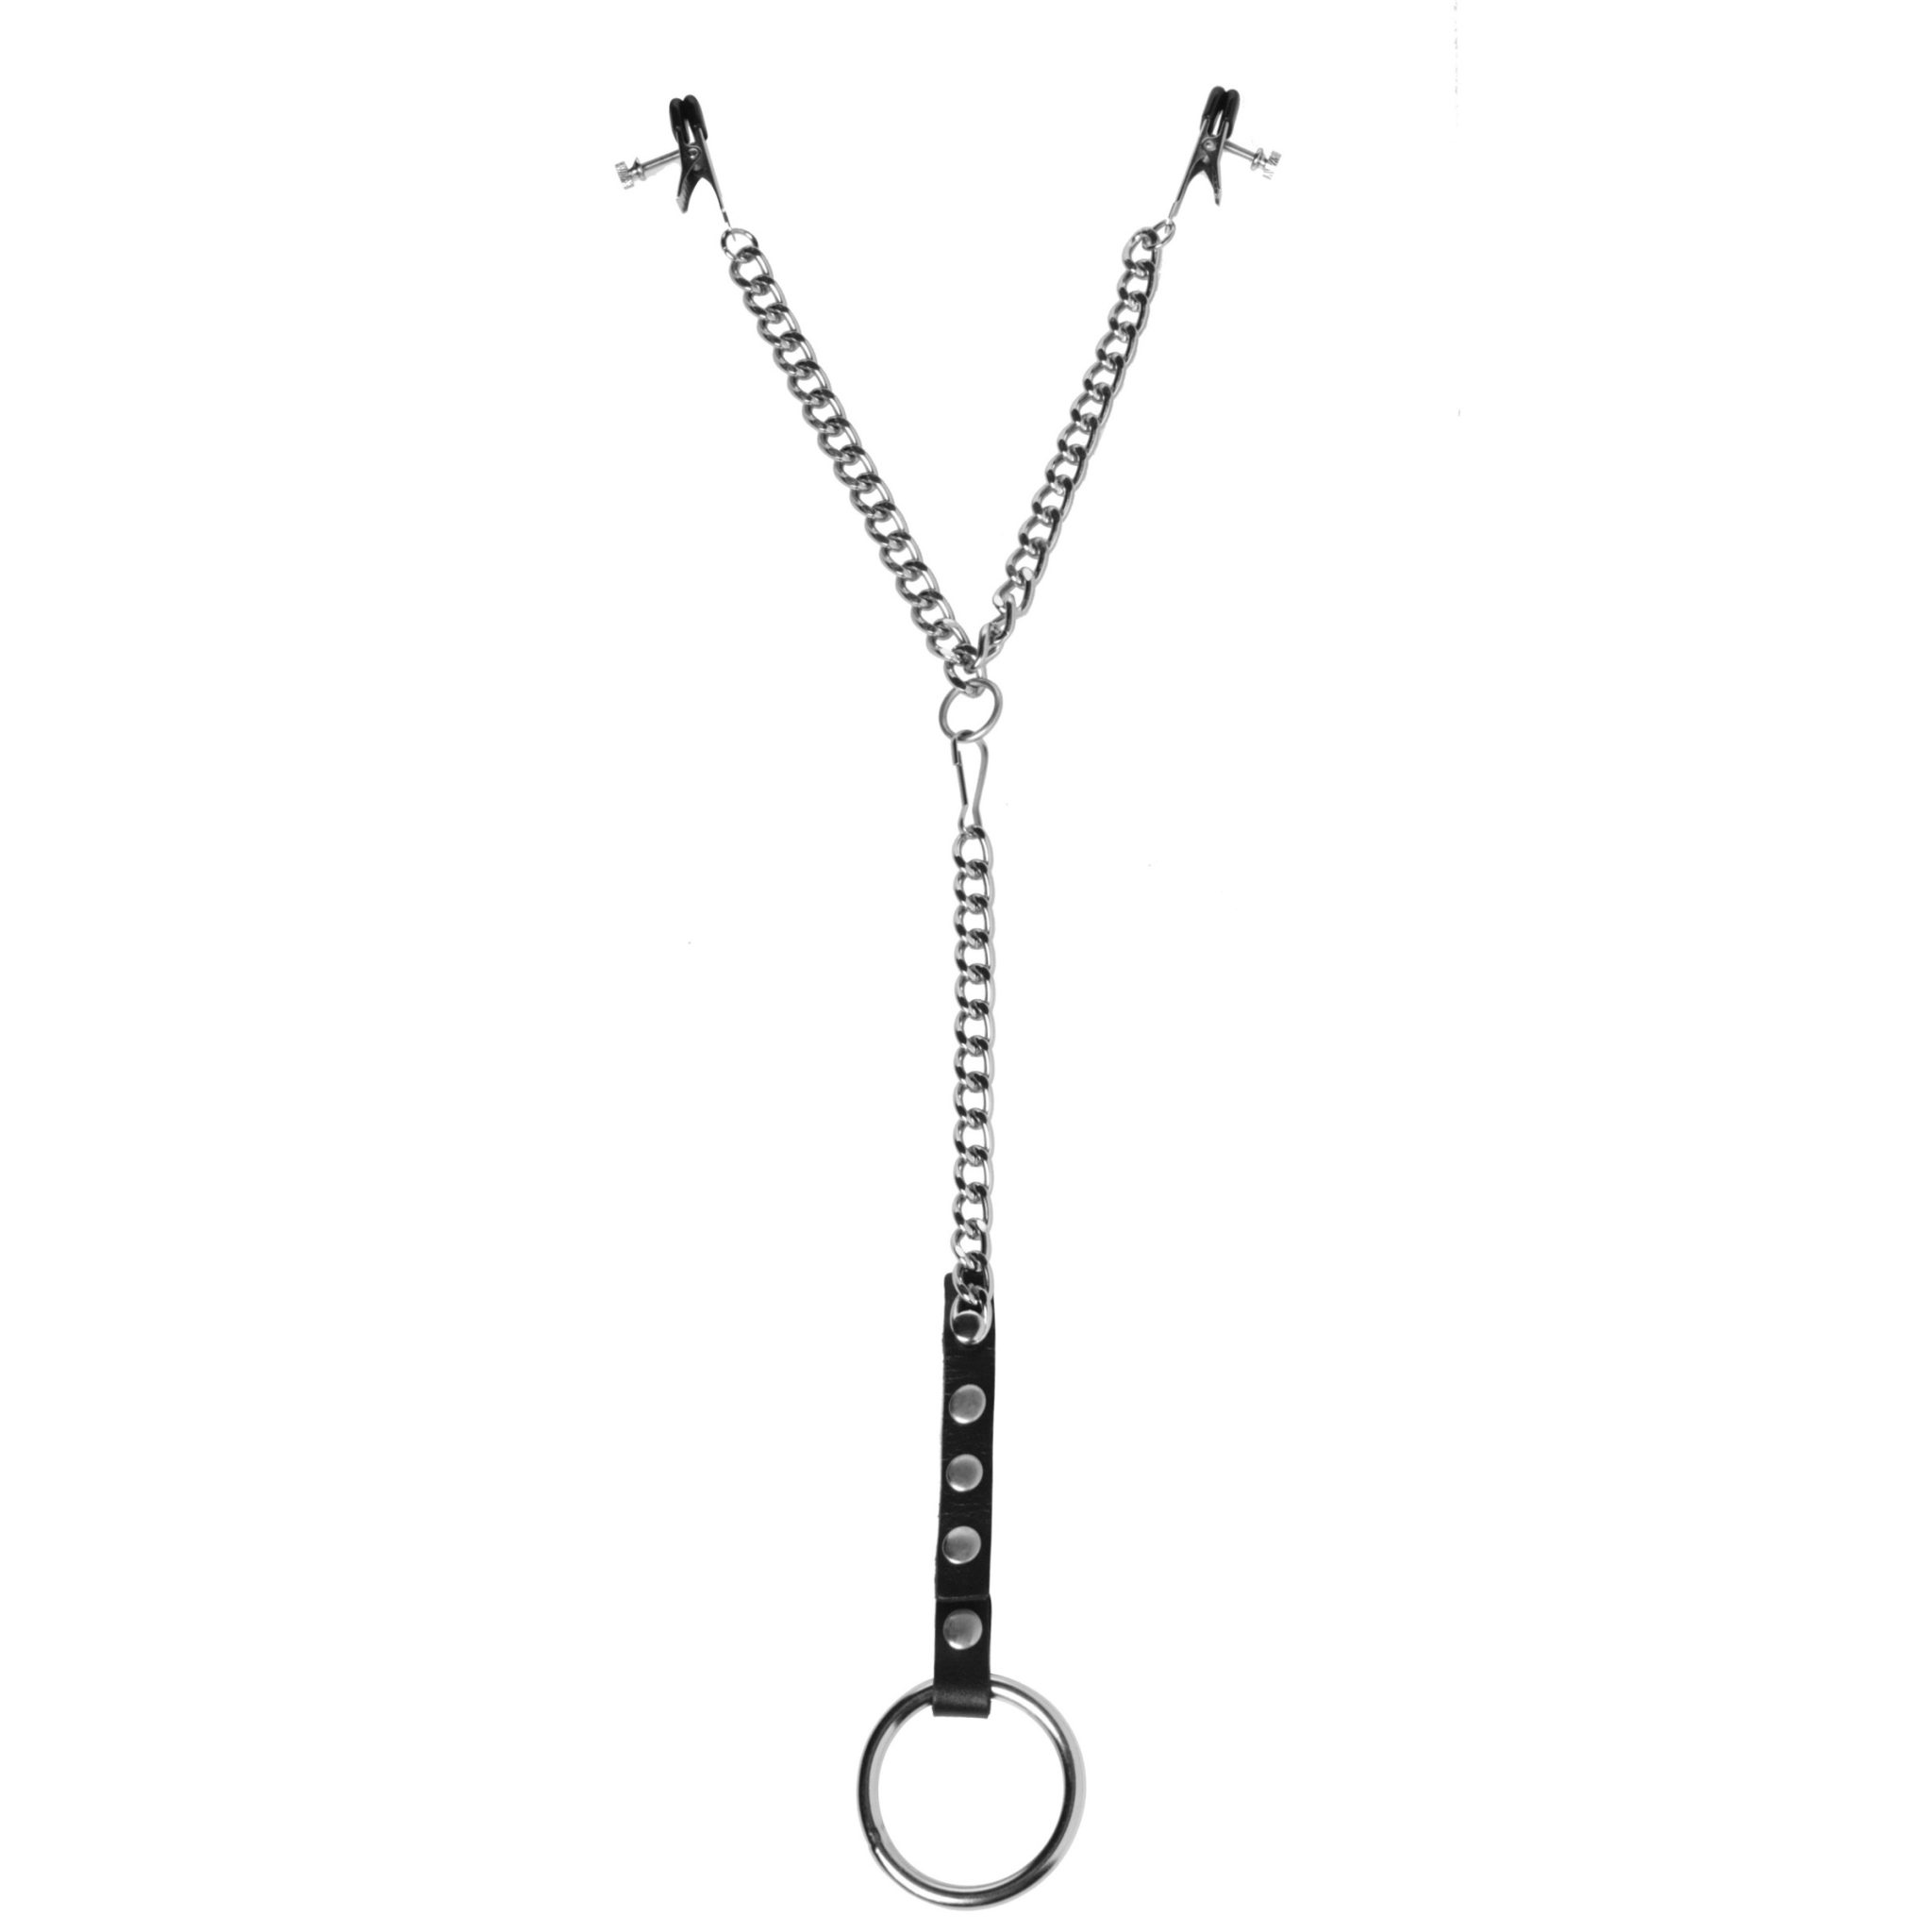 Nipple Clamps and Cock Ring Set